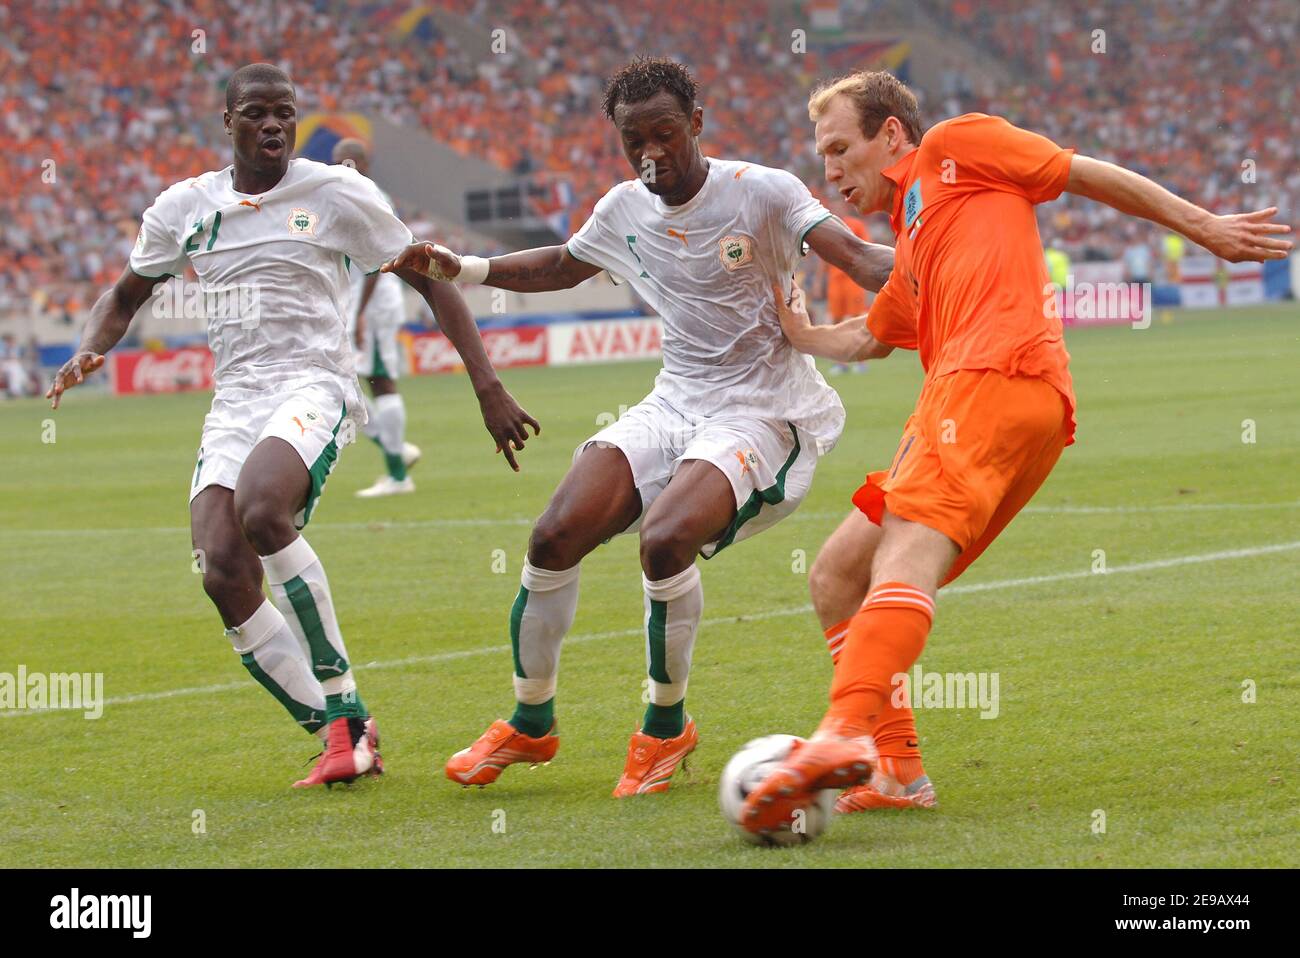 Netherlands' Arjen Ooijer and Ivory Coast's Emmanuel Eboue and Didier Zokora in action during the World Cup 2006, Netherlands vs Ivory Coast at the Gootlieb Daimler Stadion in Stuttgart, Germany on 16, 2006. Netherlands won 2-1. Photo by Gouhier-Hahn-Orban/Cameleon/ABACAPRESS.COM Stock Photo